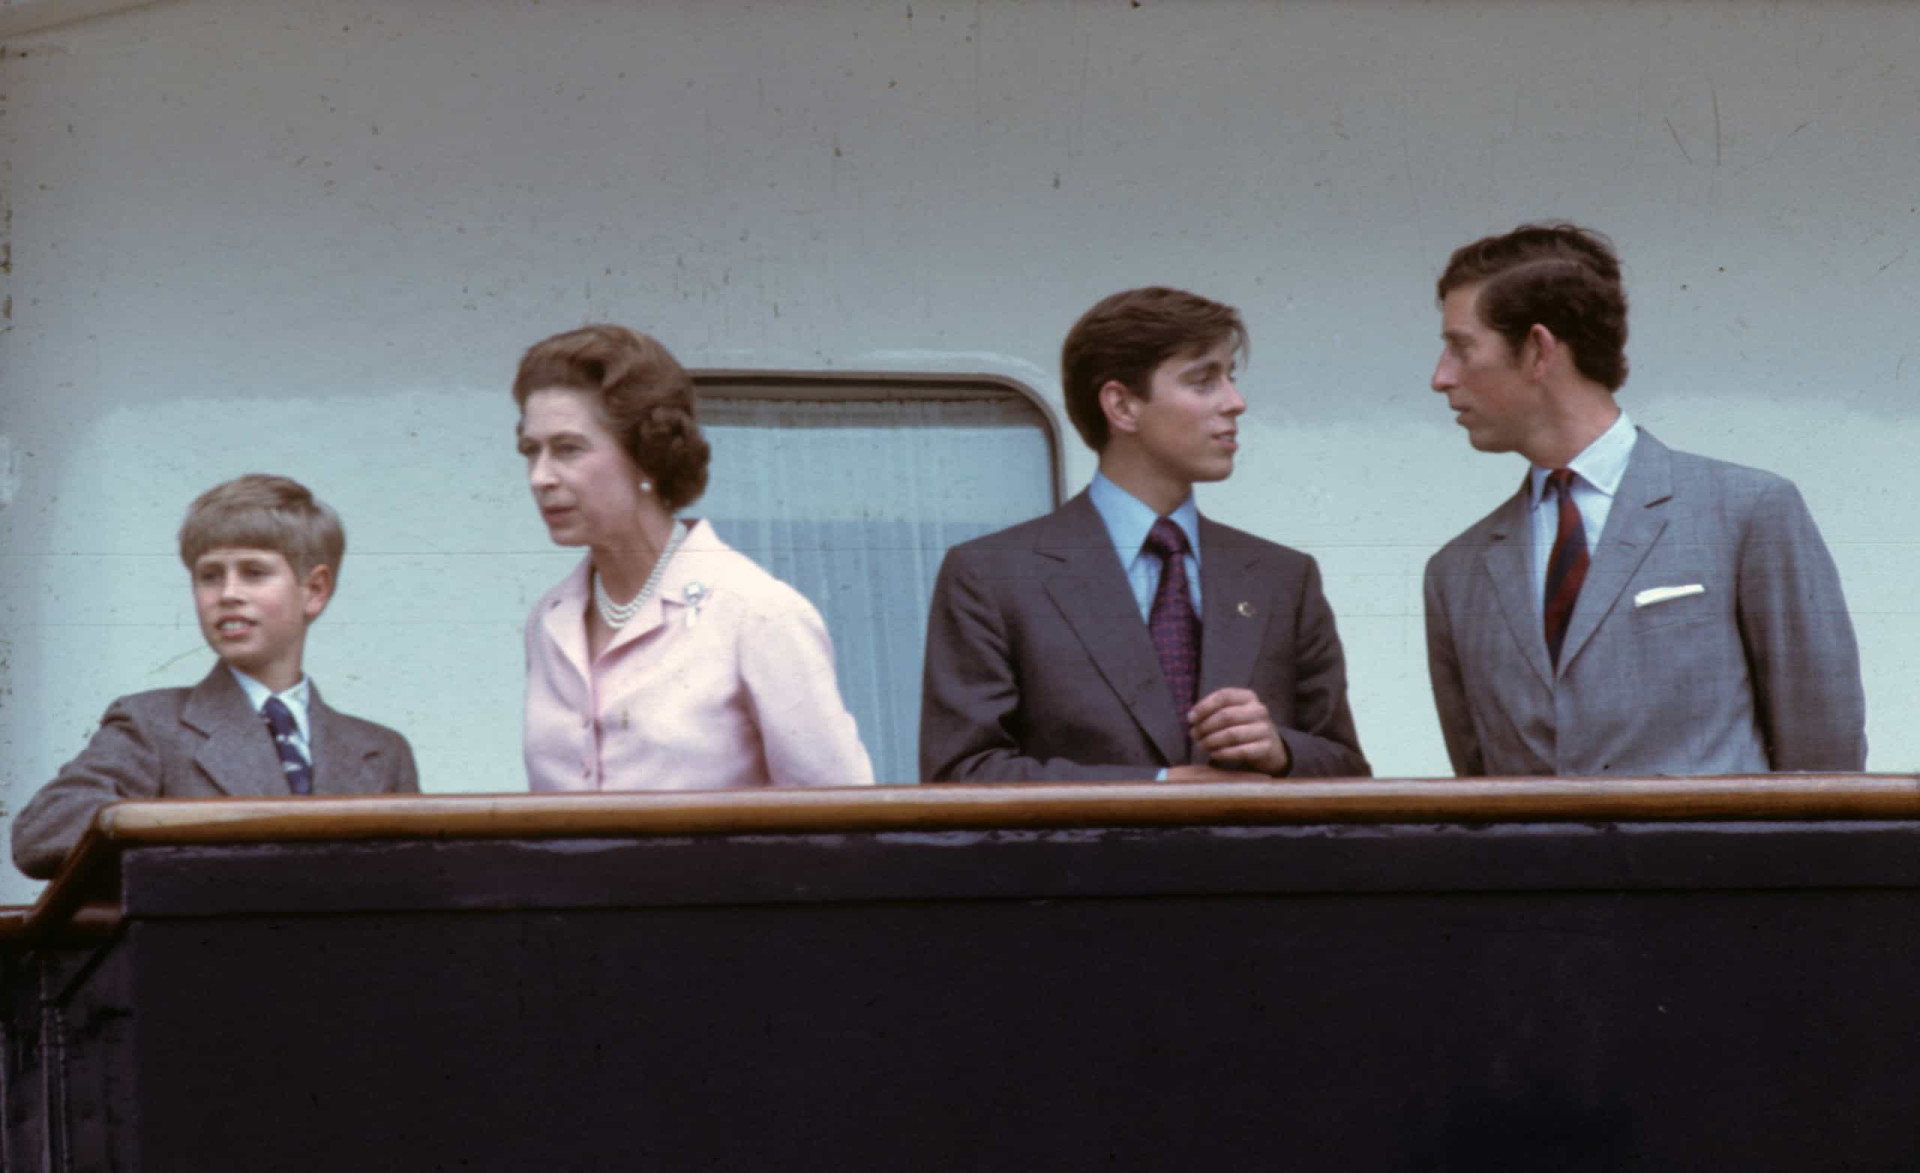 <p>Queen Elizabeth II with her sons Prince Edward, Prince Andrew, and Prince Charles on the deck of the <em>Britannia</em> as they arrive to attend the Olympic Games on July 1, 1976 in Montreal, Canada. Absent is Princess Anne, who was an athlete competing for the British equestrian team at the Summer Olympic Games that year.</p><p><a href="https://www.msn.com/en-sg/community/channel/vid-7xx8mnucu55yw63we9va2gwr7uihbxwc68fxqp25x6tg4ftibpra?cvid=94631541bc0f4f89bfd59158d696ad7e">Follow us and access great exclusive content every day</a></p>